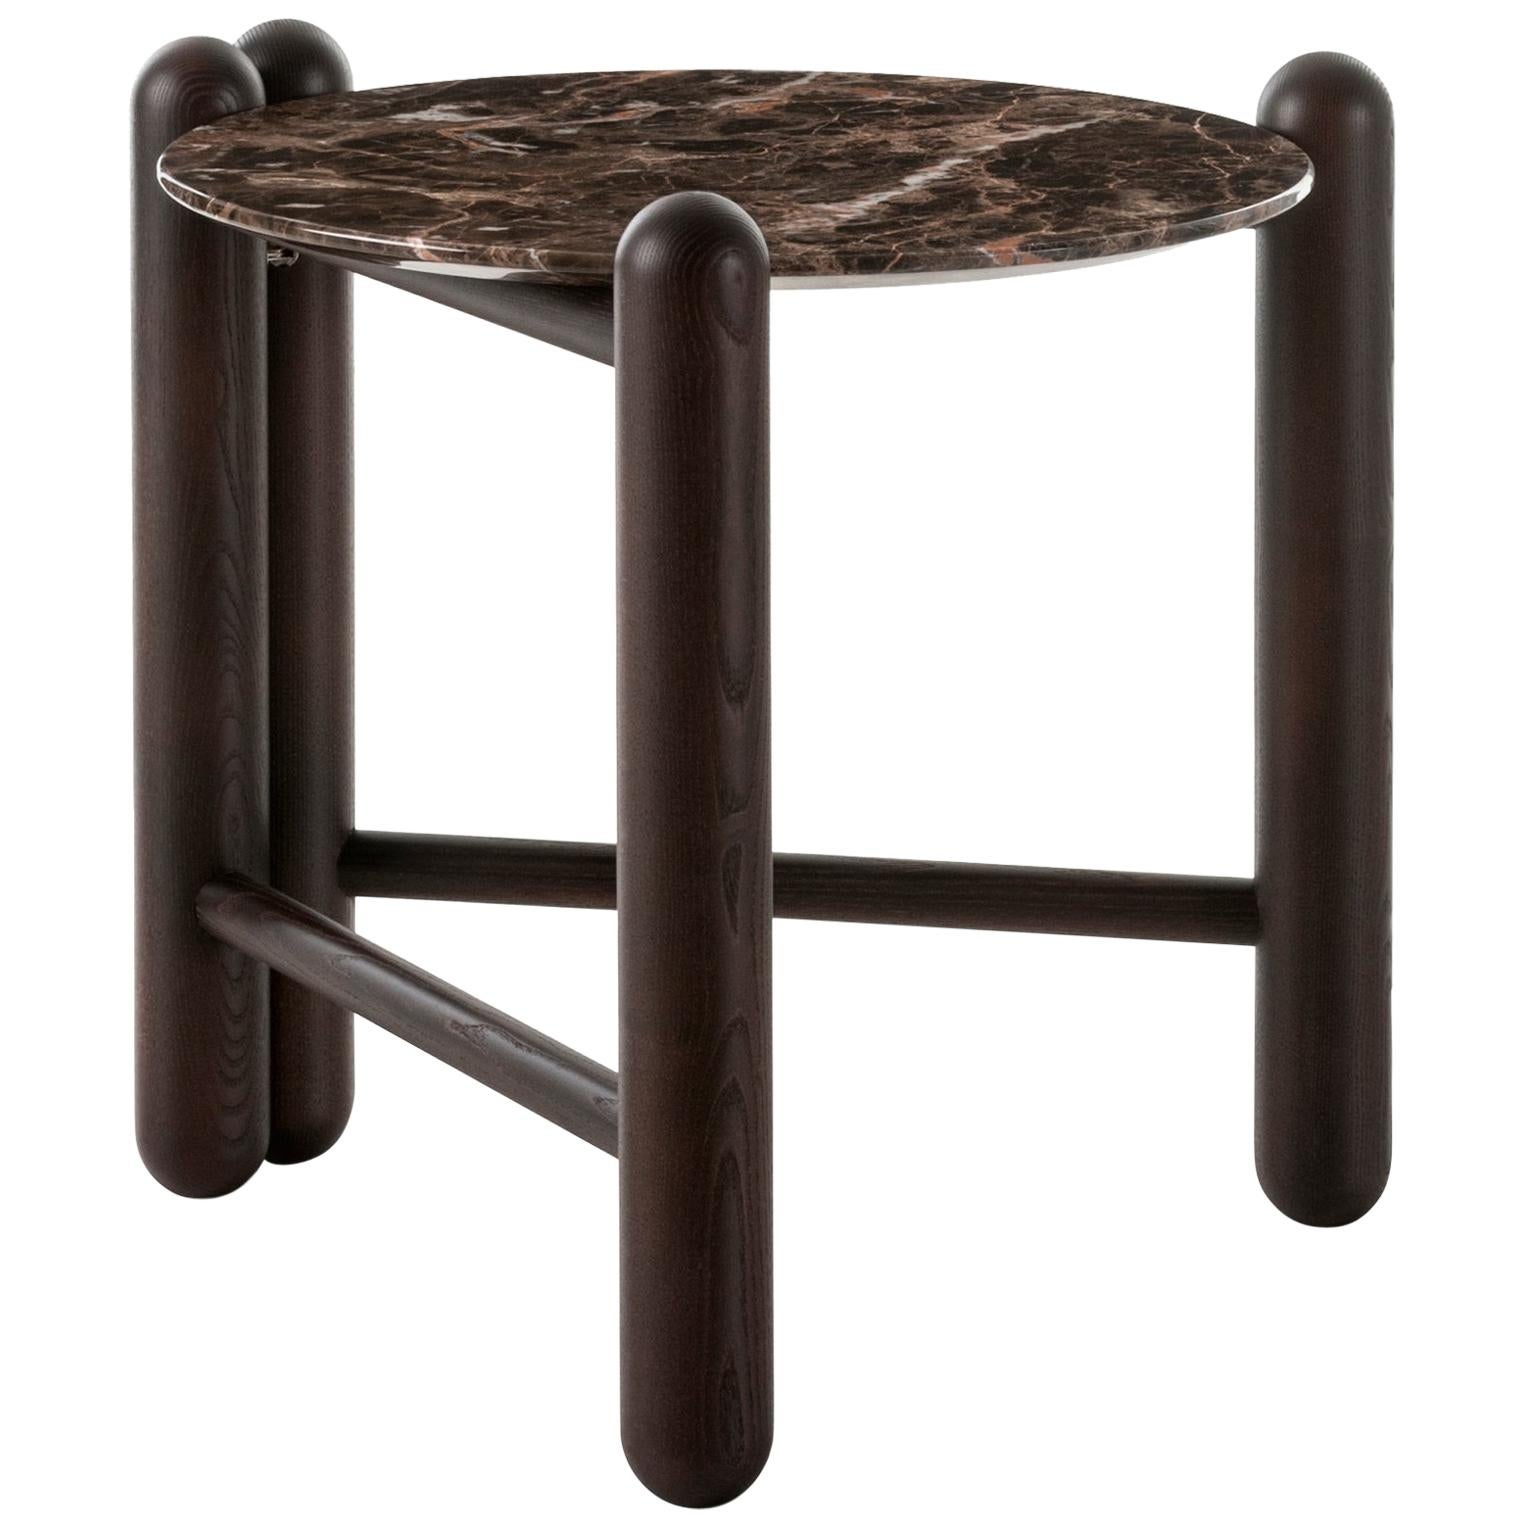 Gebrüder Thonet Vienna GmbH Hold On Side Table in Wenge and Marble Top